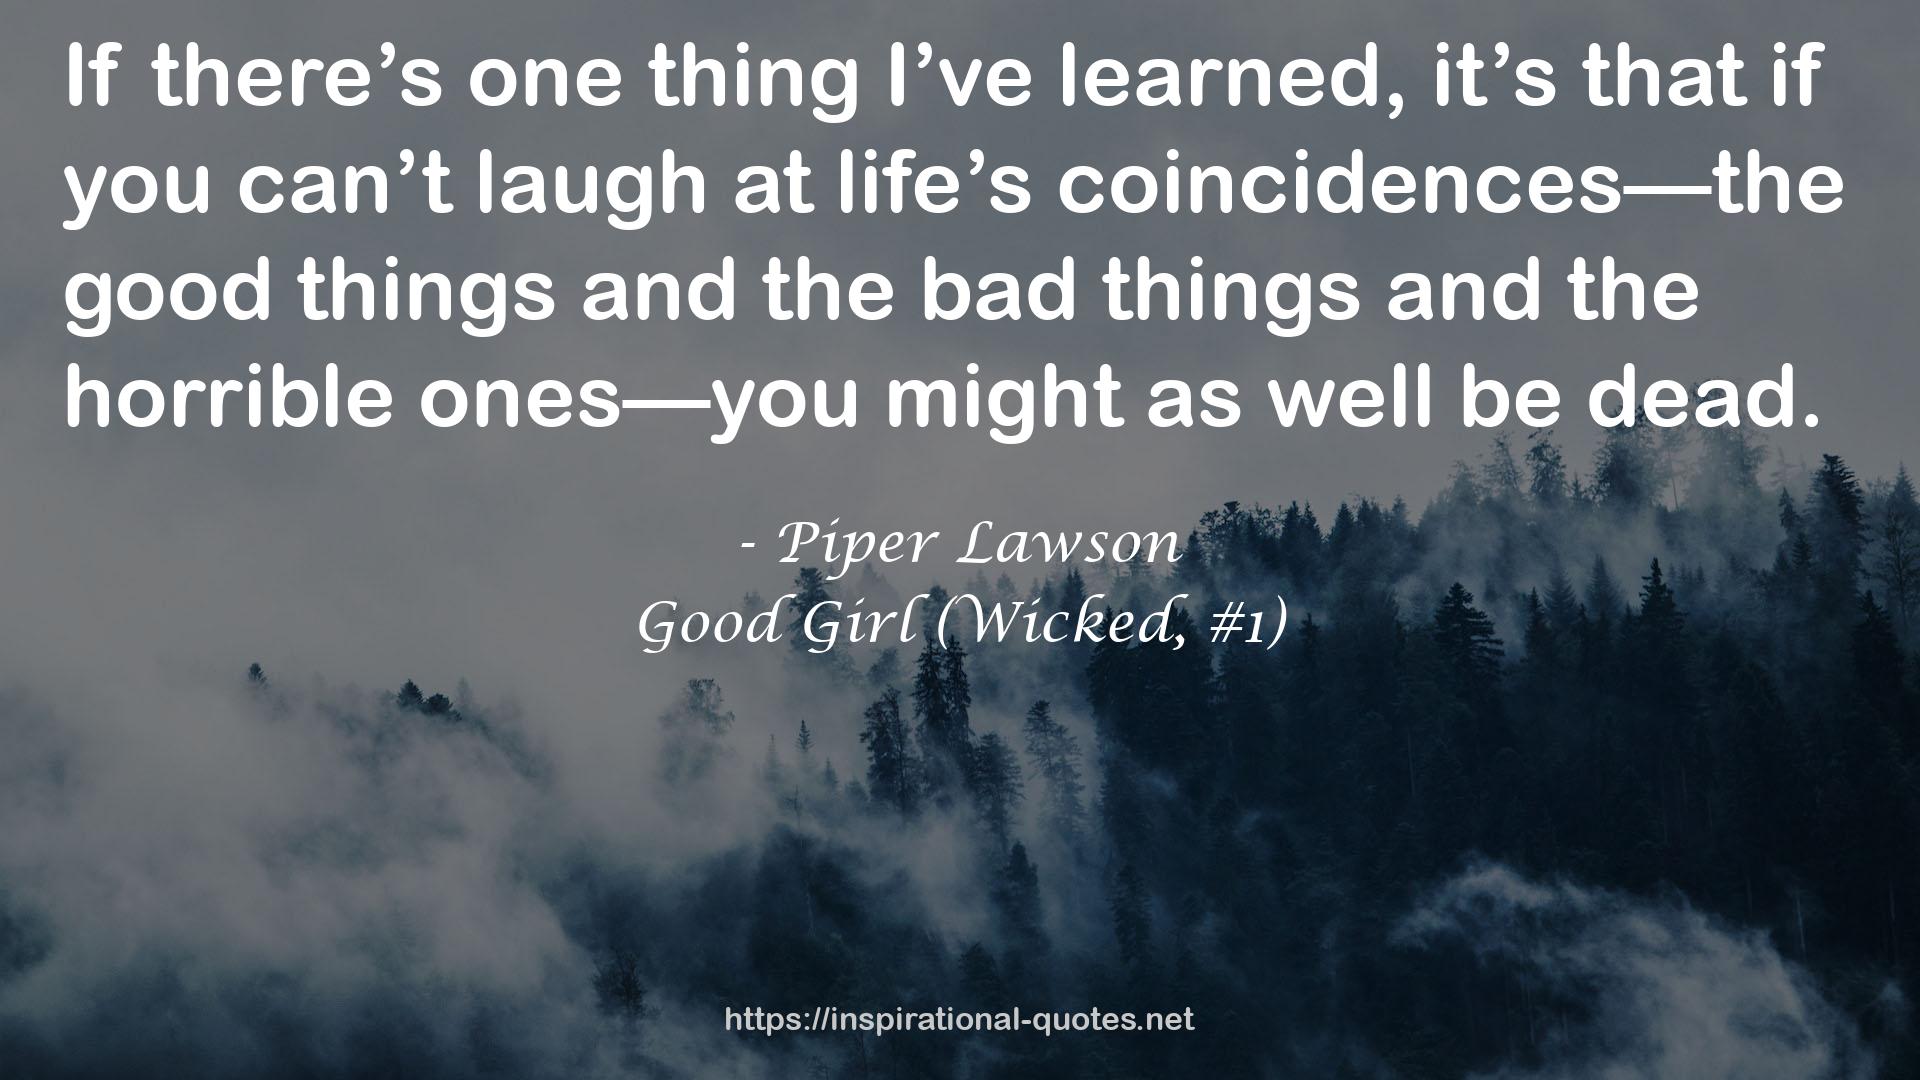 Good Girl (Wicked, #1) QUOTES